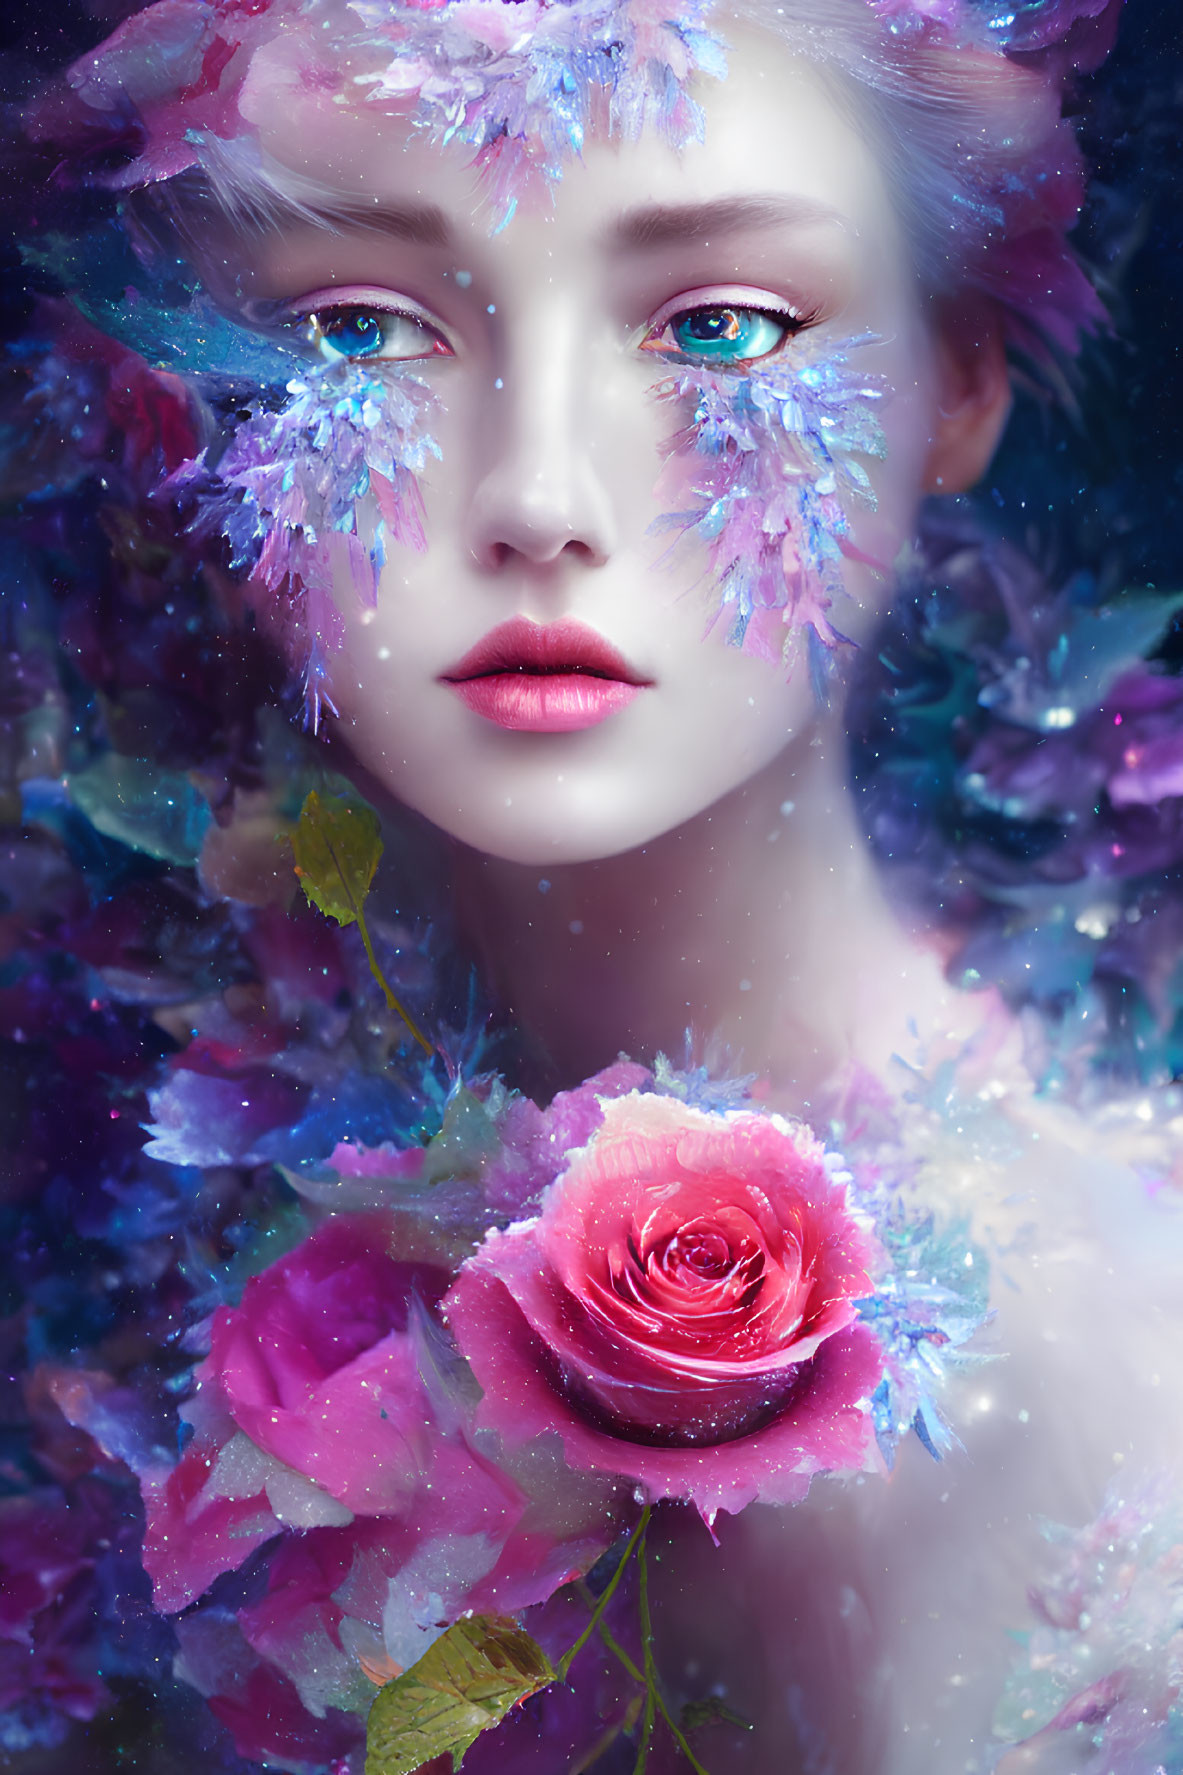 Portrait of person with pale skin, red lips, blue eyes, surrounded by flowers and crystals